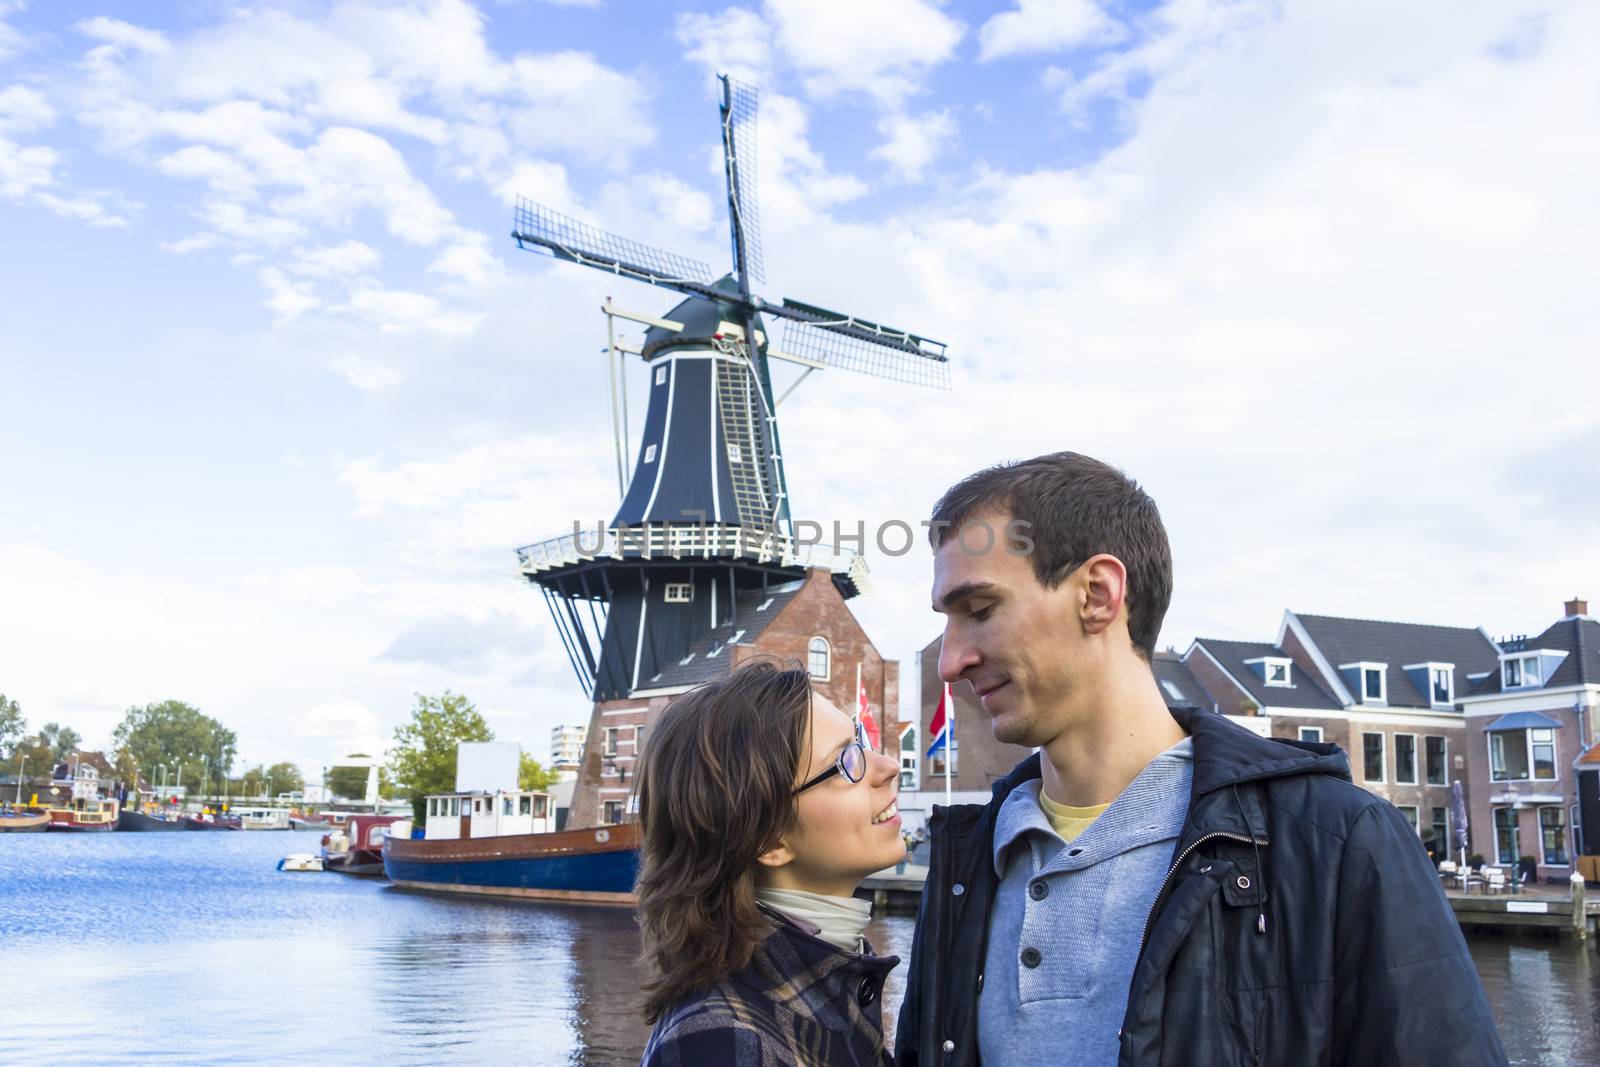 Young couple in Dutch town of Haarlem, the Netherlands